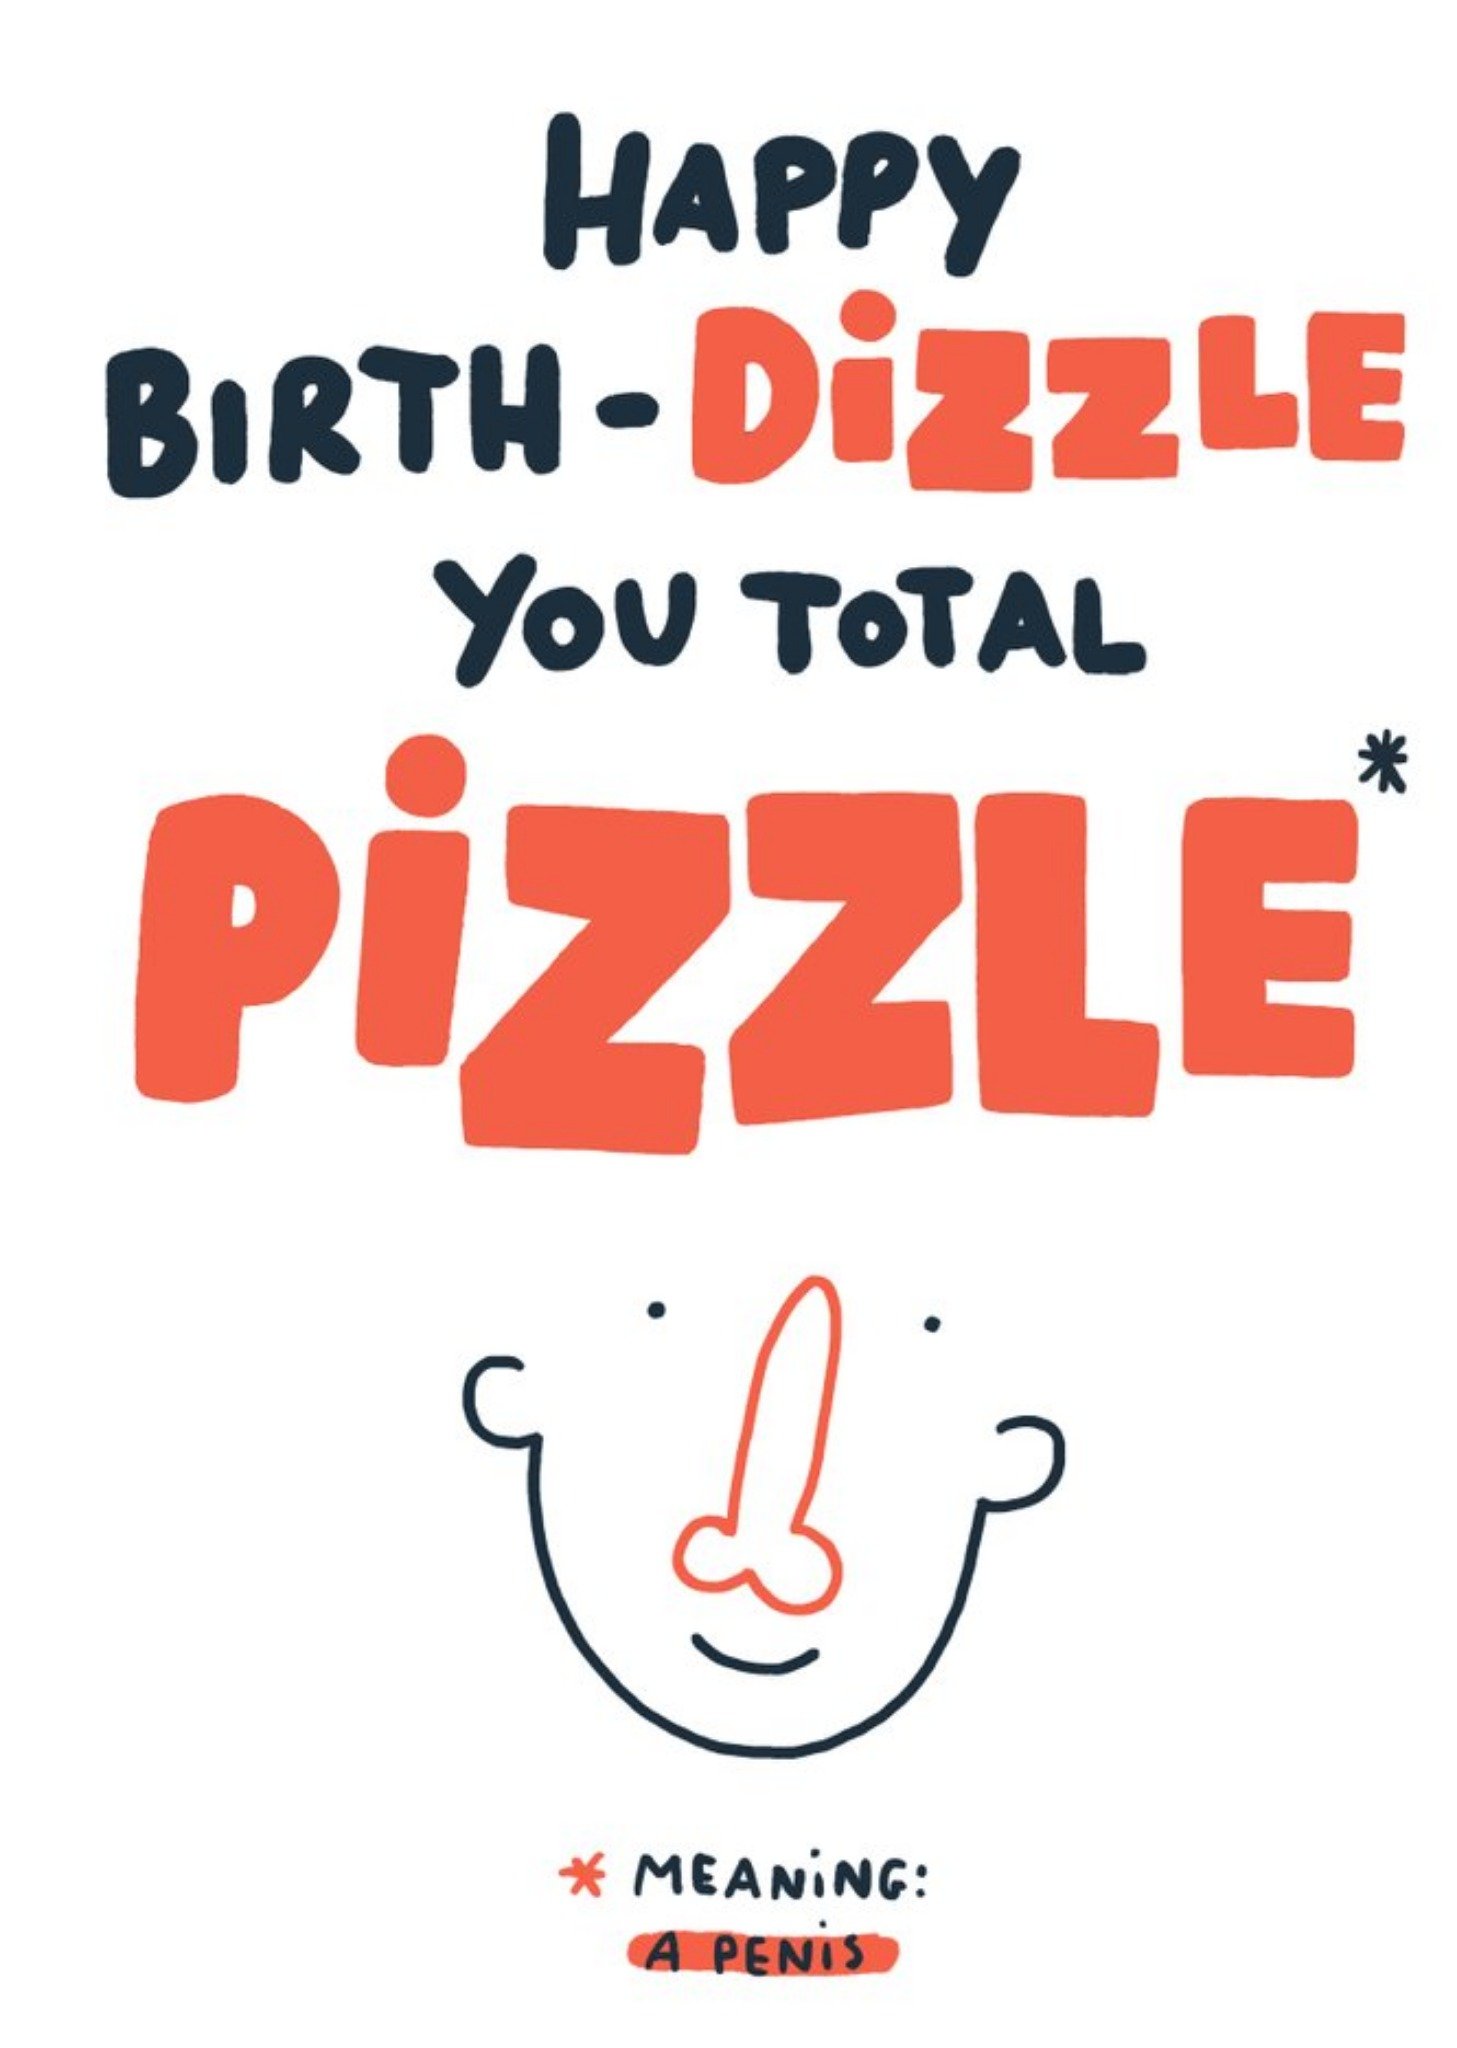 Moonpig Happy Birth Dizzle You Total Pizzle Funny Birthday Card, Large